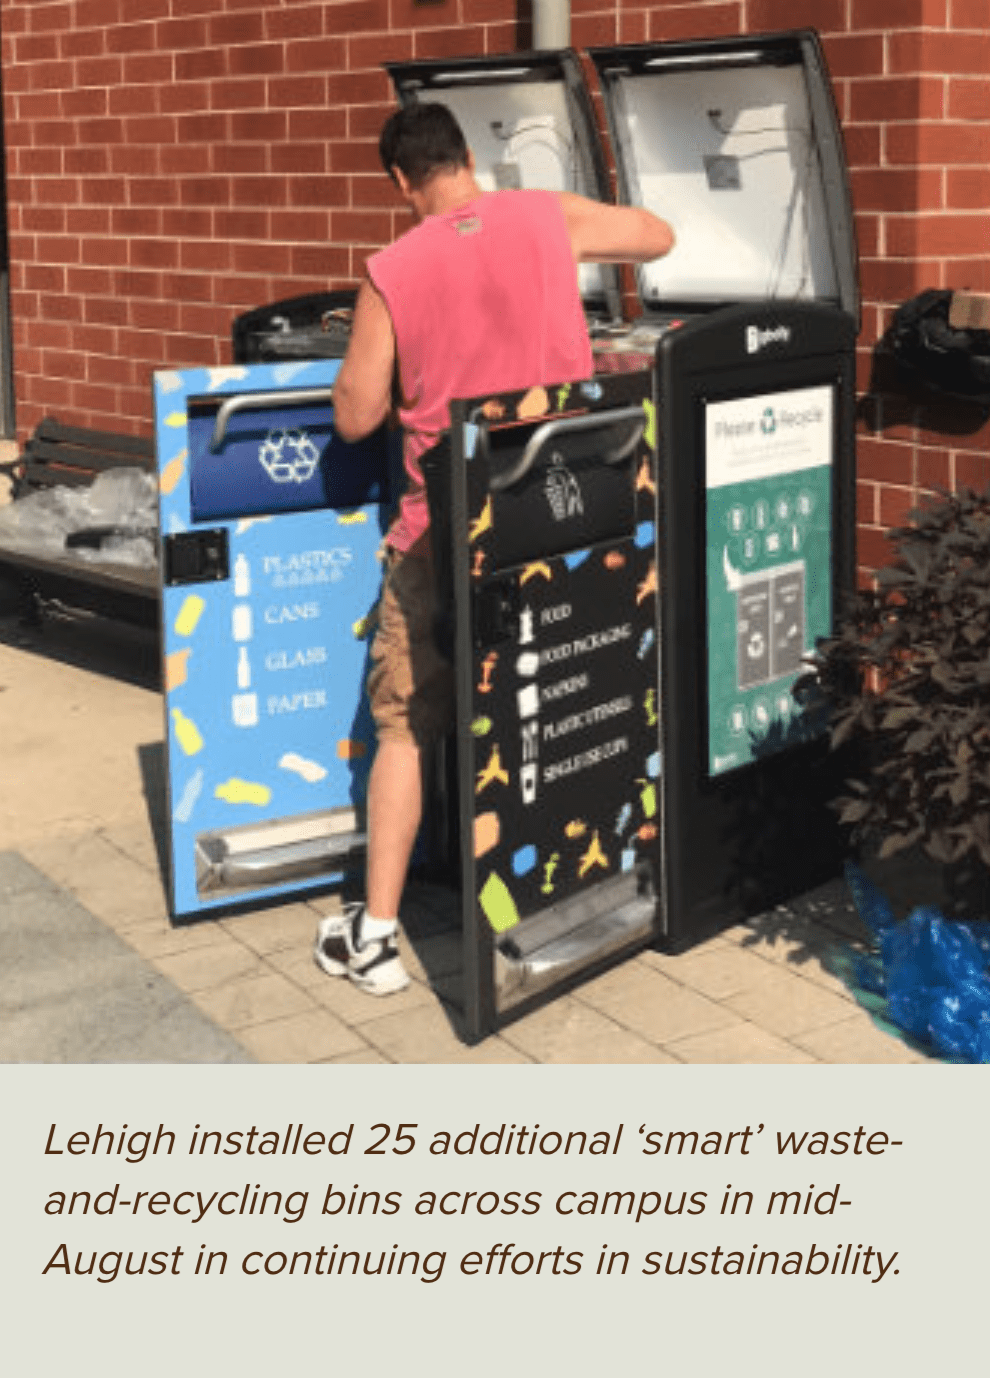 Bigbelly at Lehigh: Lehigh installed 25 additional ‘smart’ waste-and-recycling bins across campus in mid-August in continuing efforts in sustainability.